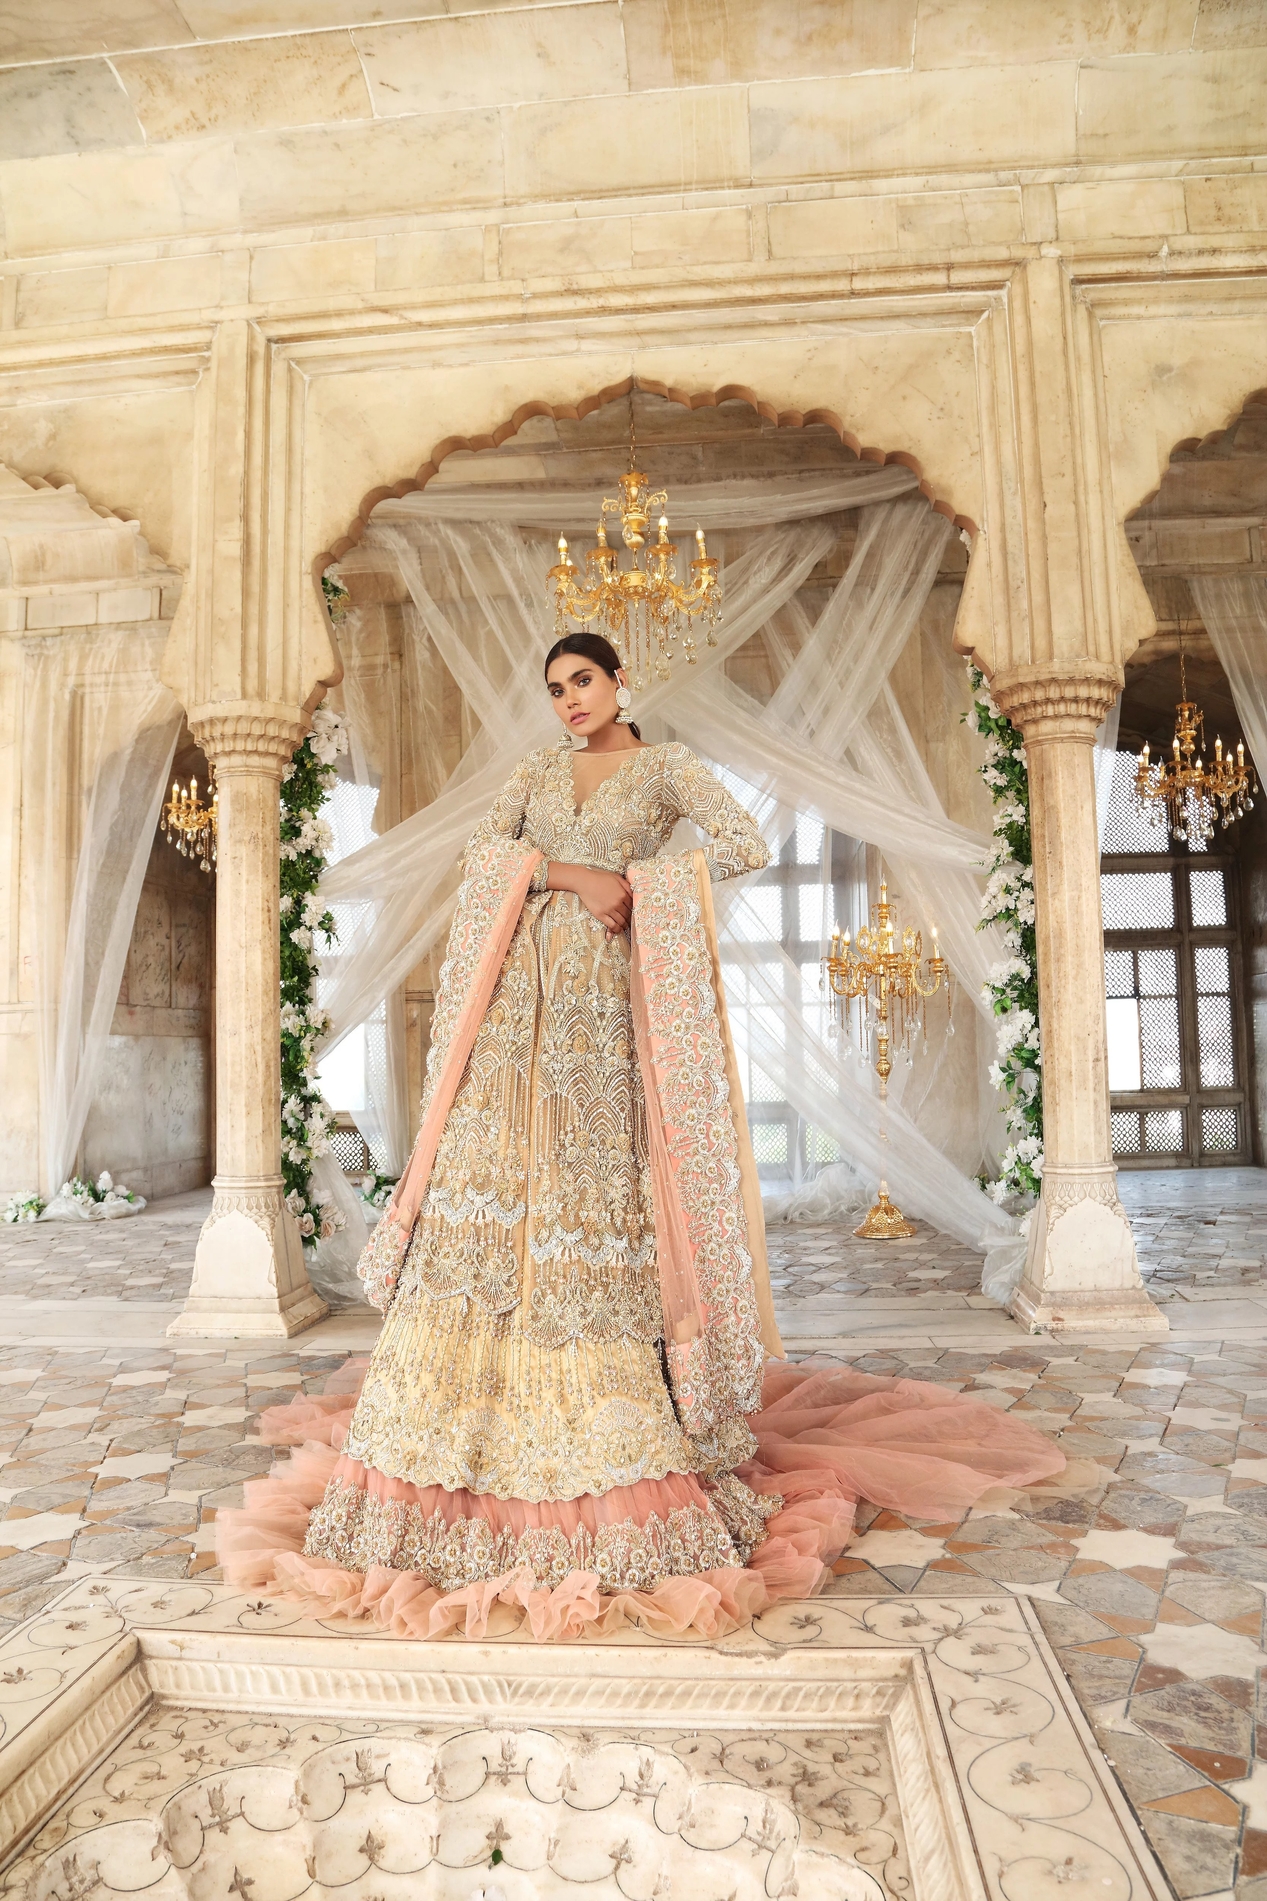 Erum Khan Fawn & Peach color open front Maxi Bridal Dress On Walima Day